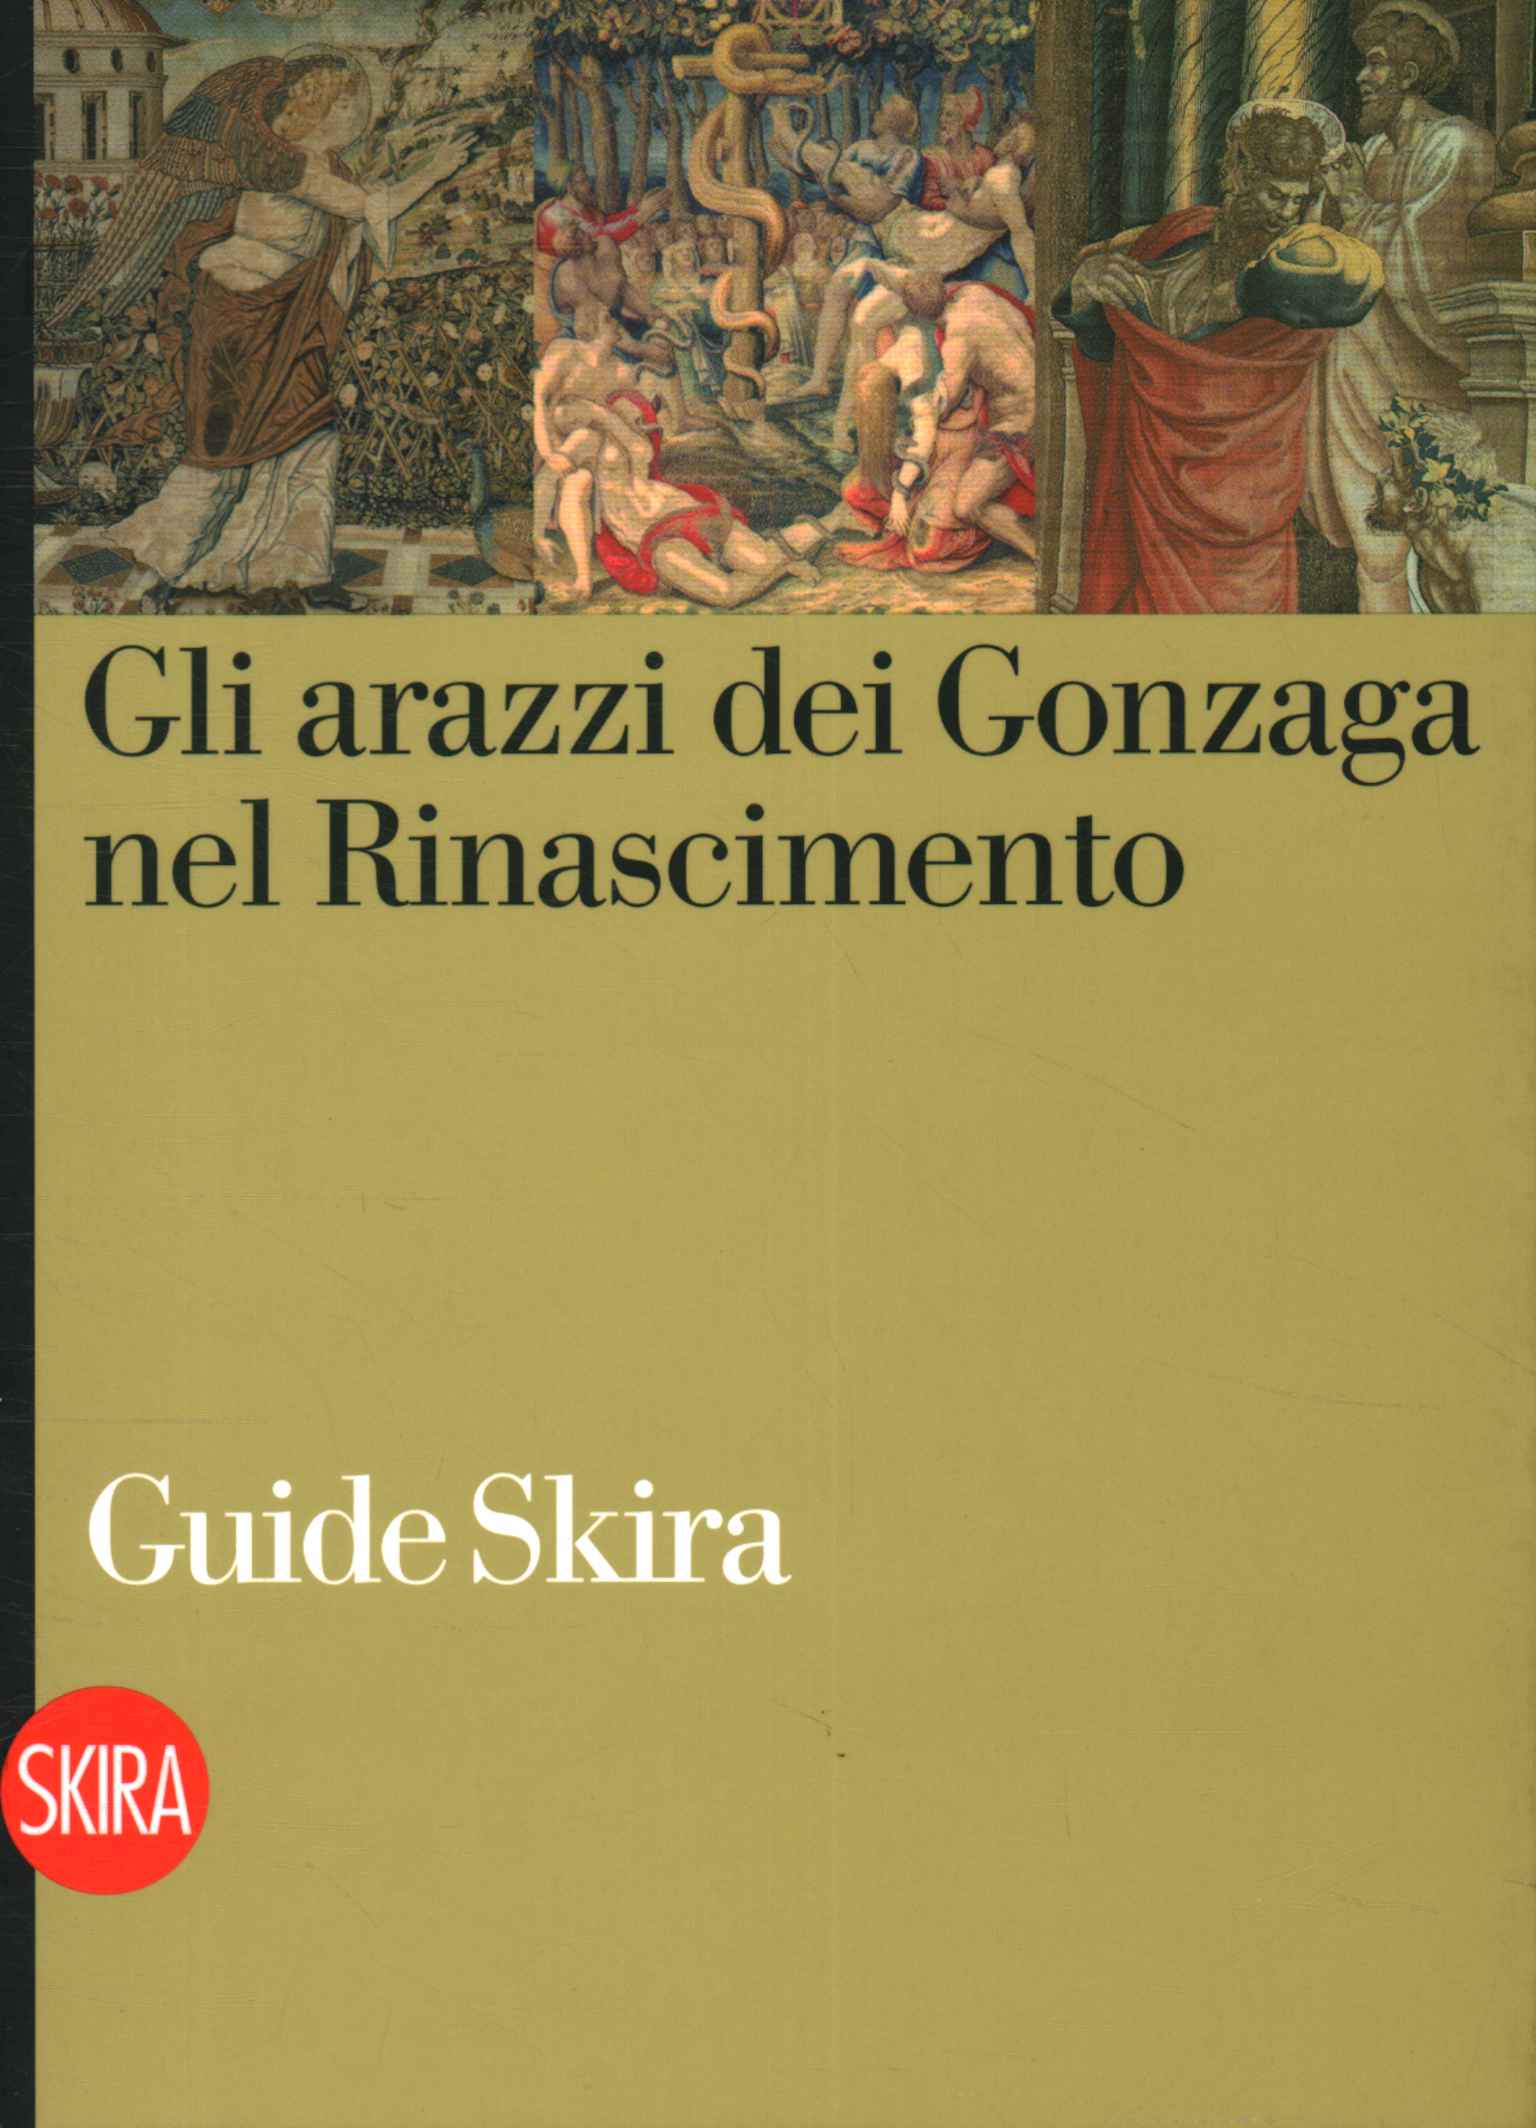 The Gonzaga tapestries in the Renaissance